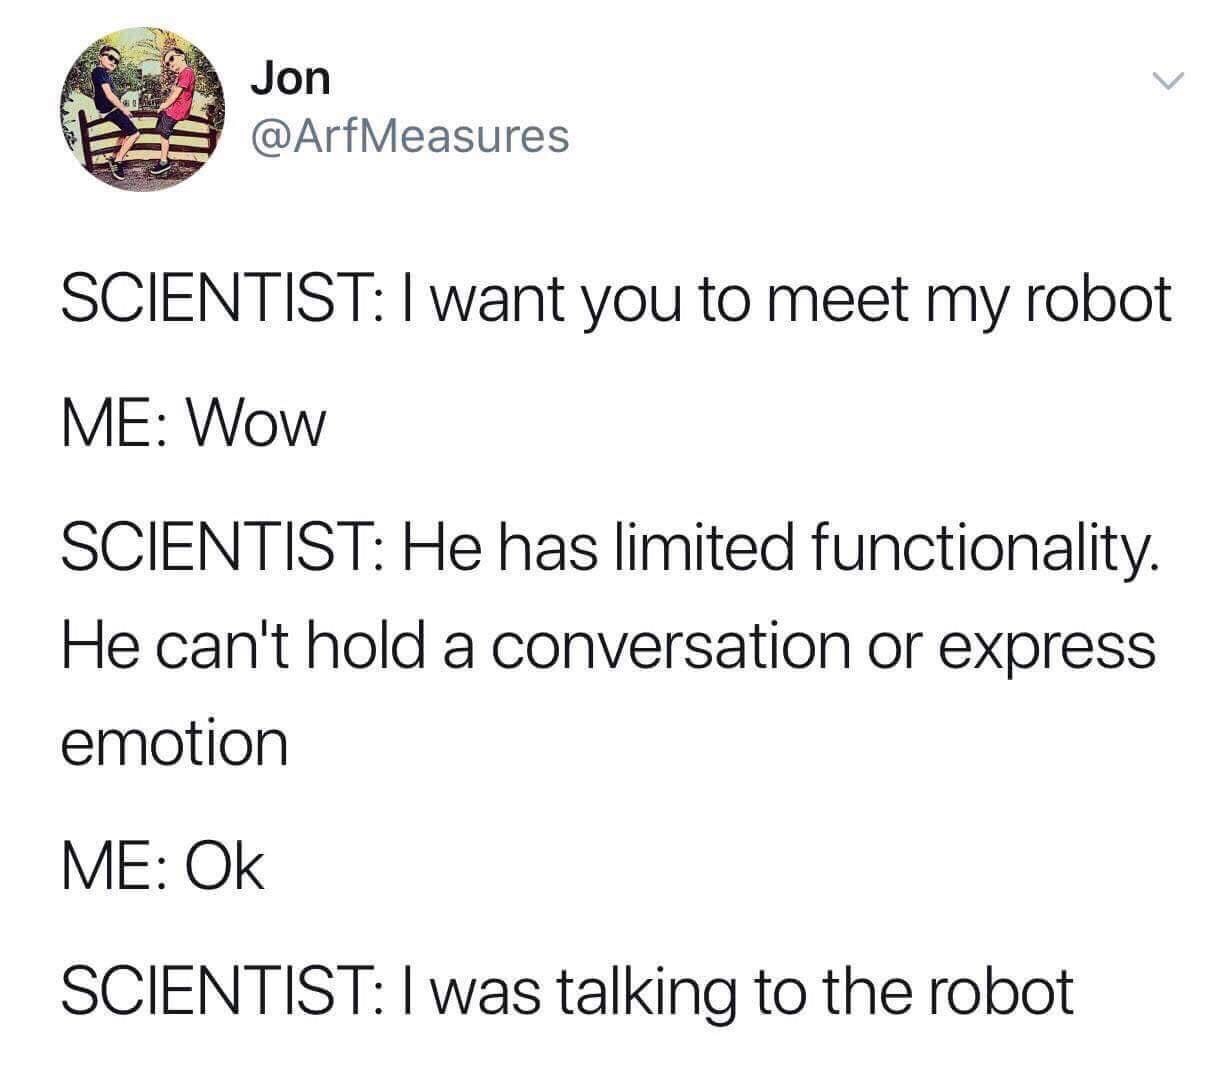 can t hold a conversation meme - Jon Scientist I want you to meet my robot Me Wow Scientist He has limited functionality. He can't hold a conversation or express emotion Me Ok Scientist I was talking to the robot